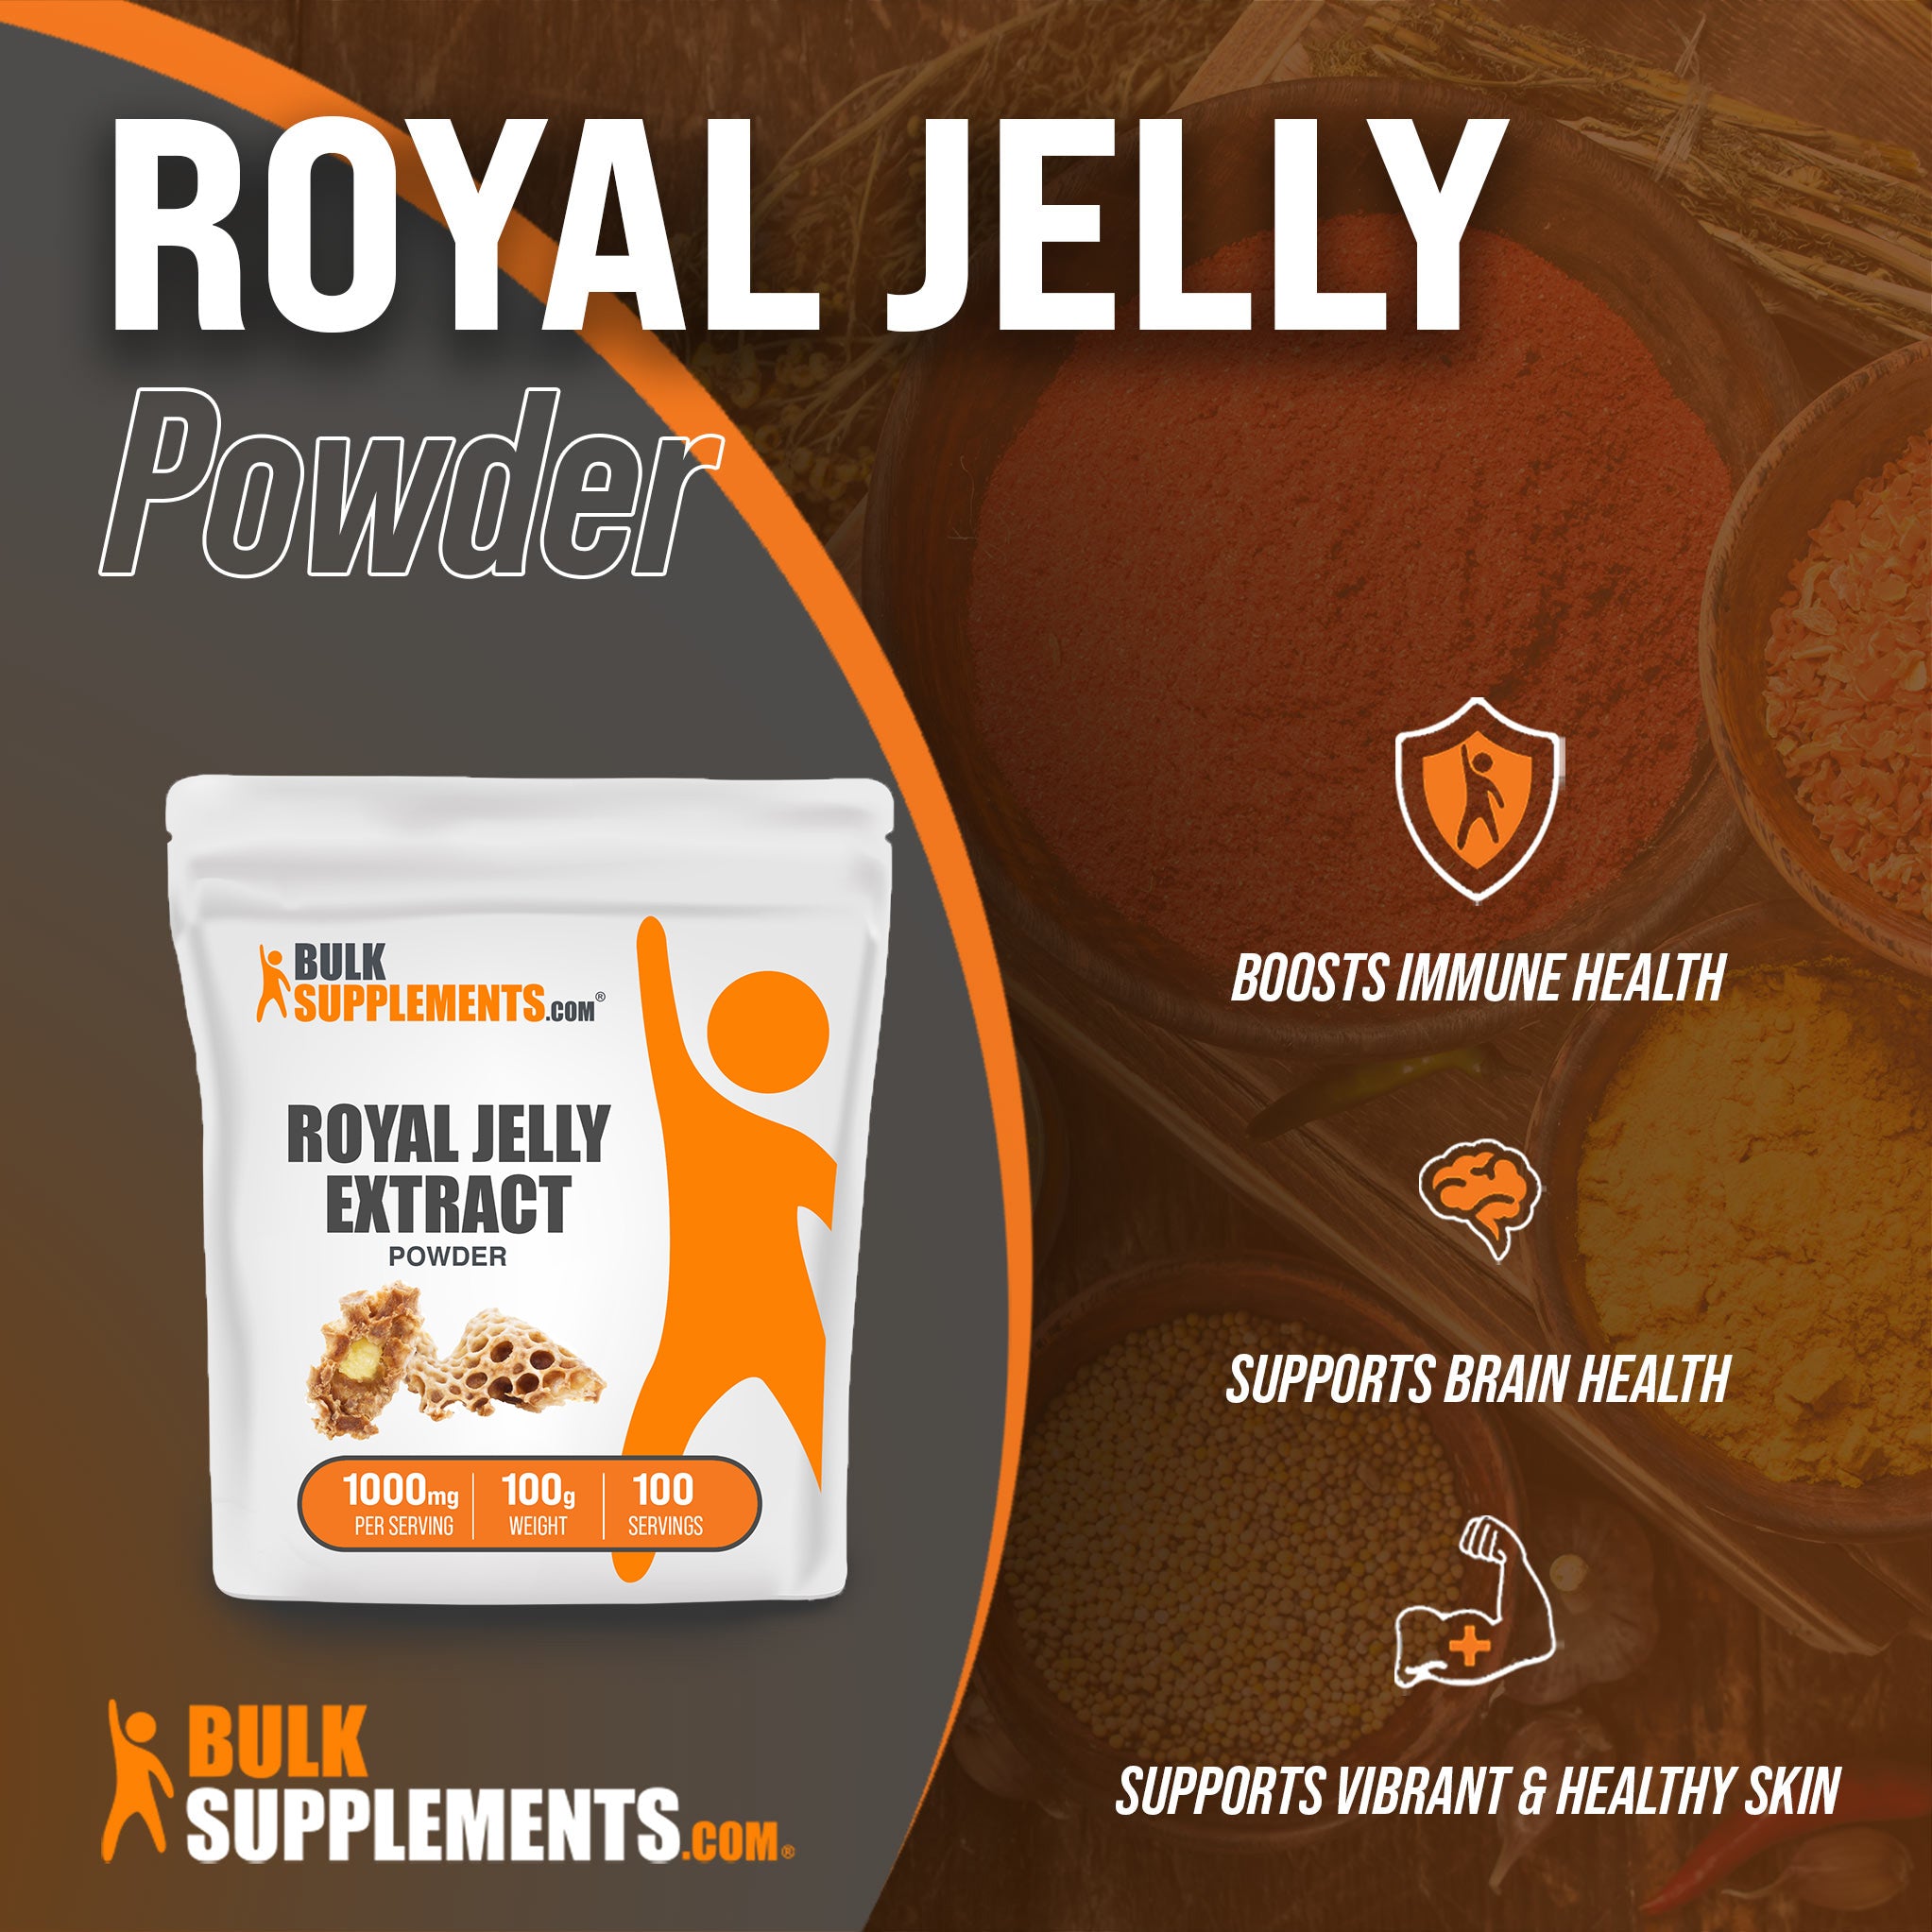 Benefits of Royal Jelly Powder: boosts immune health, supports brain health, supports vibrant and healthy skin